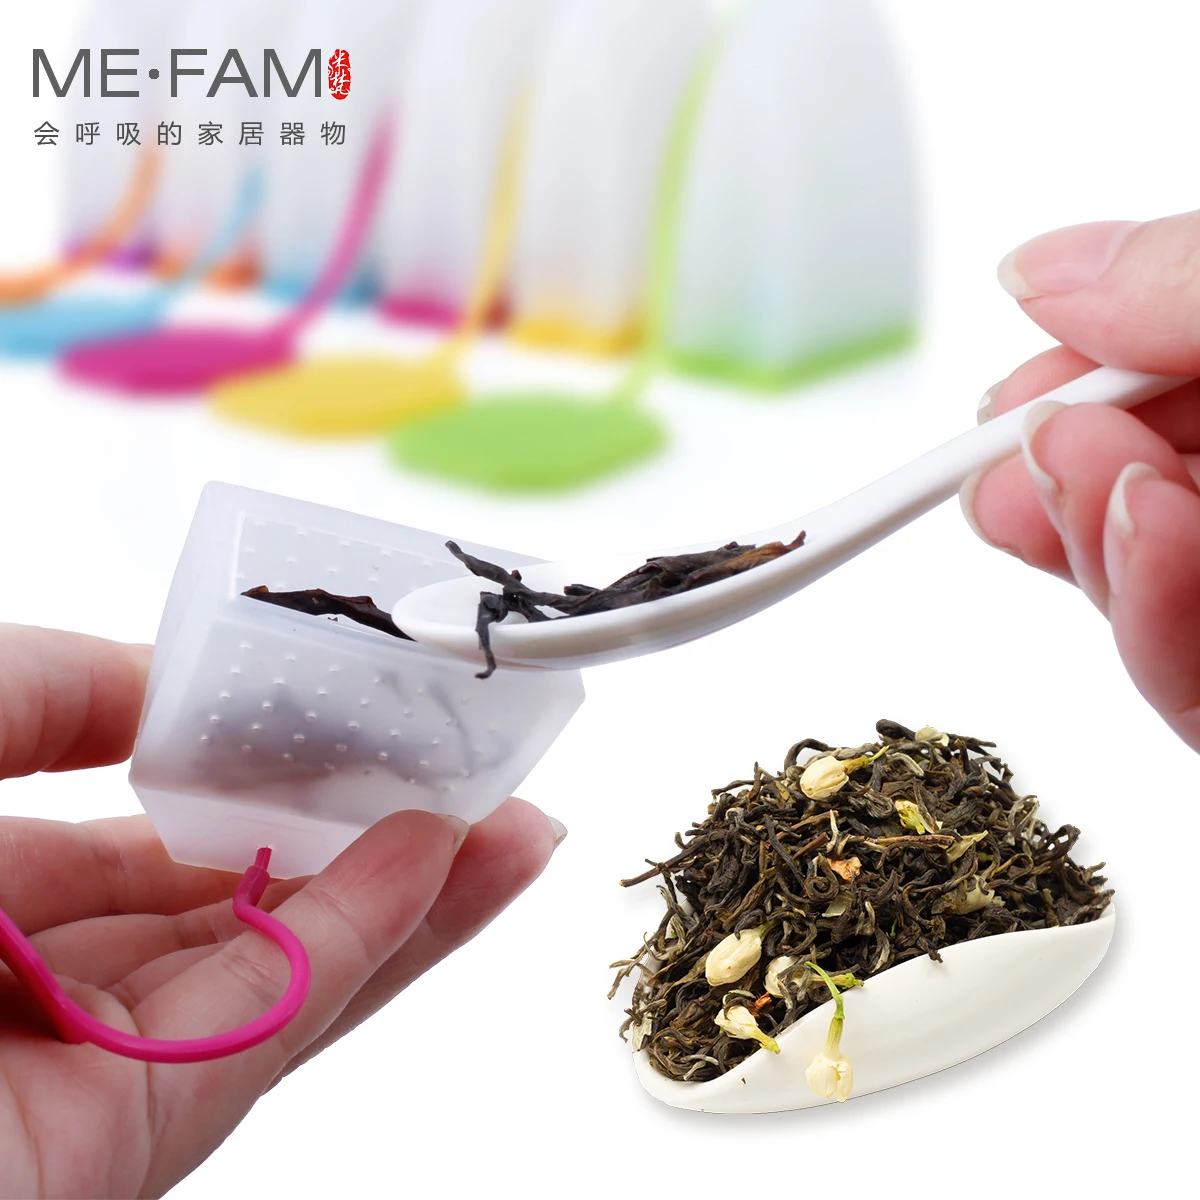 ME.FAM Colorful Jelly Silicone Tea Bag Safe Eco-Friendly Non-toxic Reusable Tea-leaves Infuser Filter Herbal Spice Strainer Tool images - 6